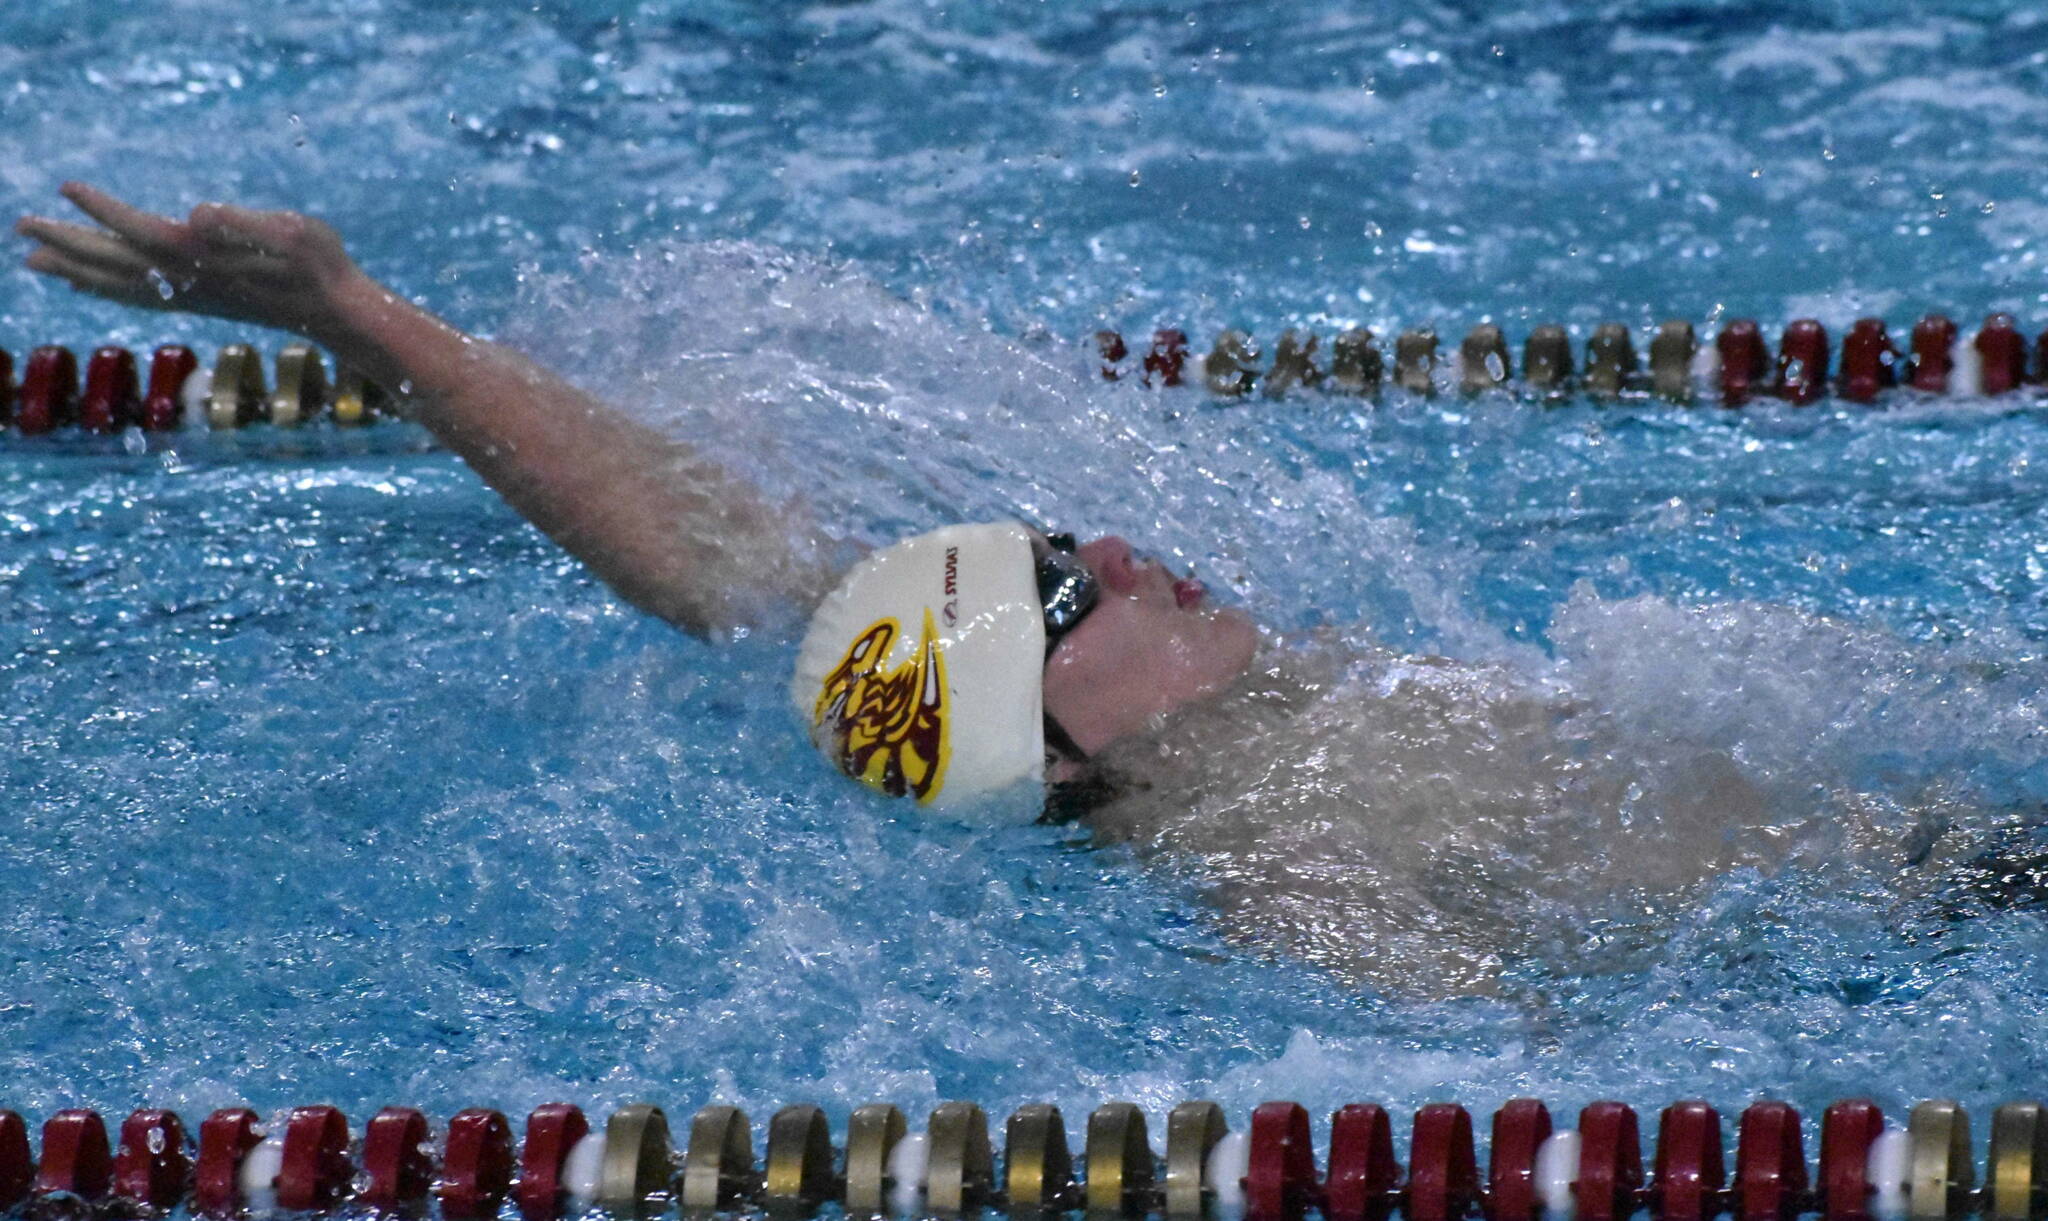 PHOTOS BY KEVIN HANSON The Enumclaw Aquatic Center played host the afternoon of Dec. 15 to a three-team swim meet that involved local athletes from Enumclaw and White River high schools, along with Tacoma’s Foss Falcons. In these photos, White River’s Evan Weisheyer competes in the 200-yard freestyle and Enumclaw’s McCade Walker takes part in the 100-yard backstroke. The Plateau athletes now take a break until Jan. 5 when they host the Franklin Pierce Cardinals and Washington Patriots.